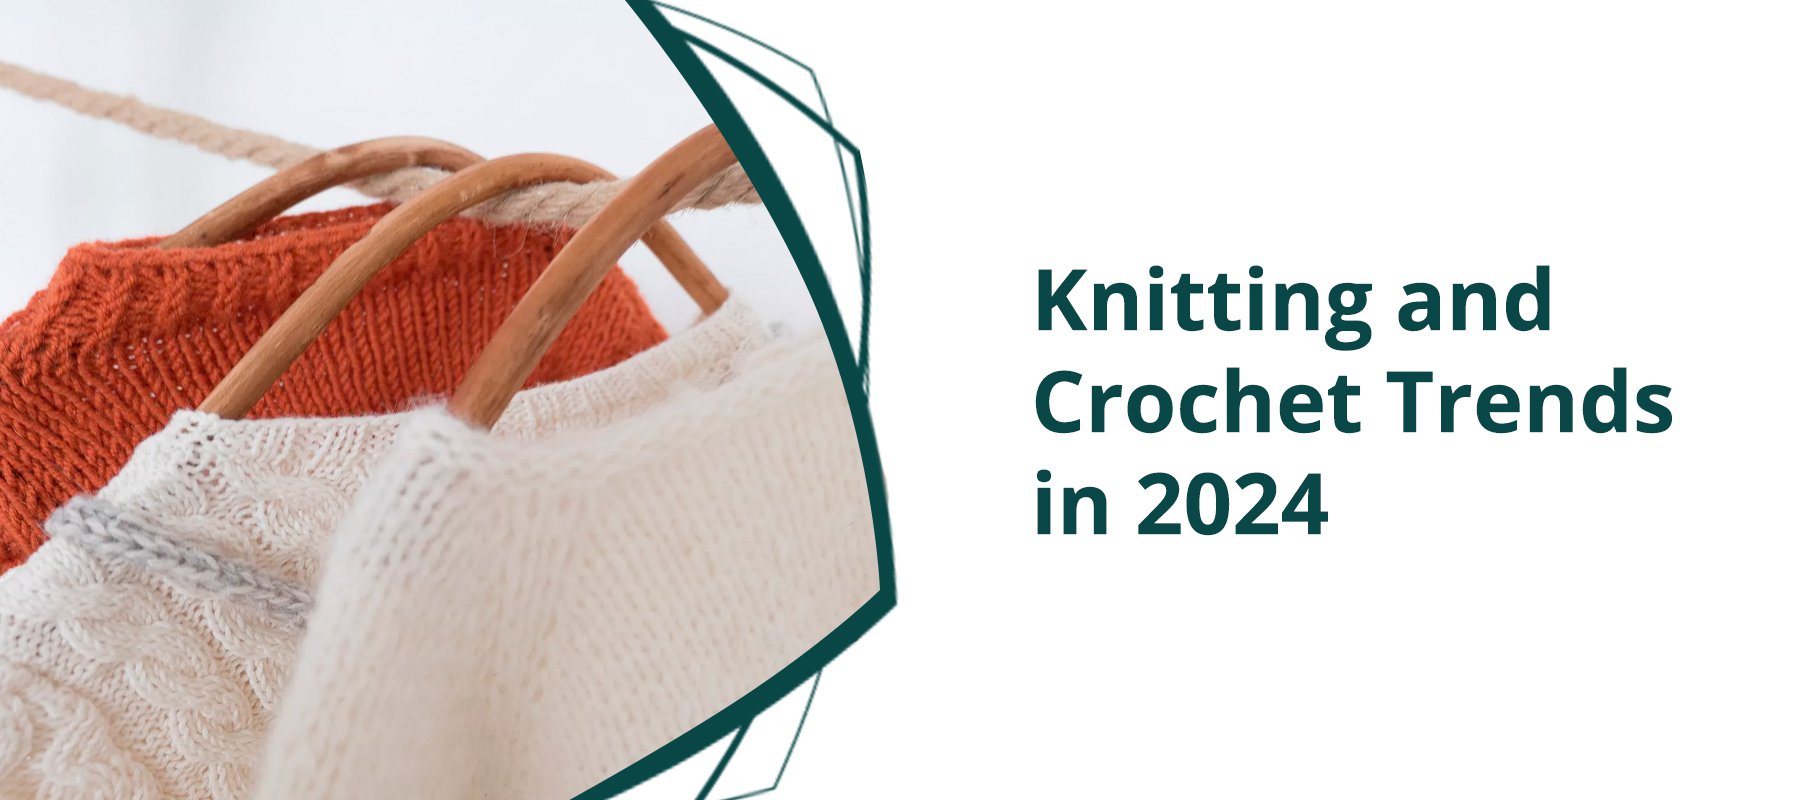 Trendsetting in Textiles: Upcoming Knitting and Crochet Trends in 2024